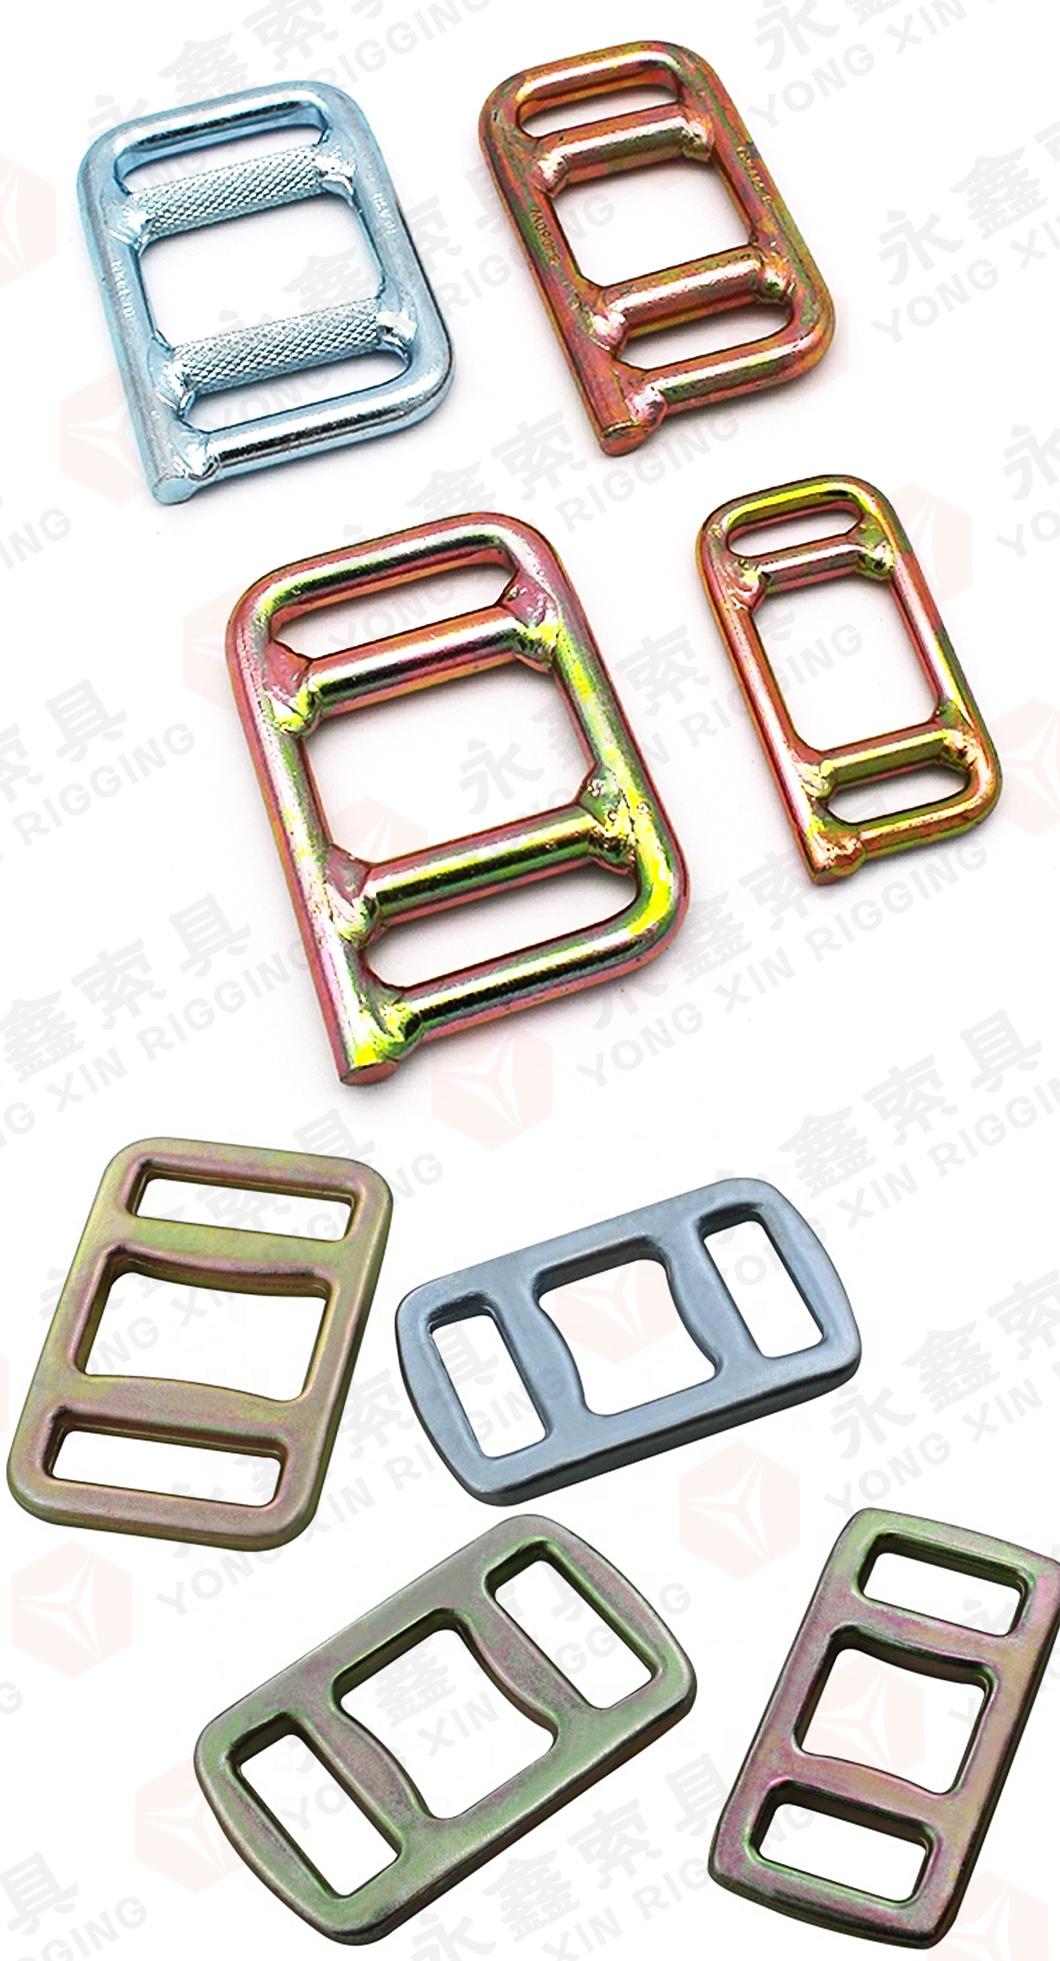 32-50mm Copper Stair Buckle for Woven Strap, 1 Inch Metal Stair Buckle for Strapping